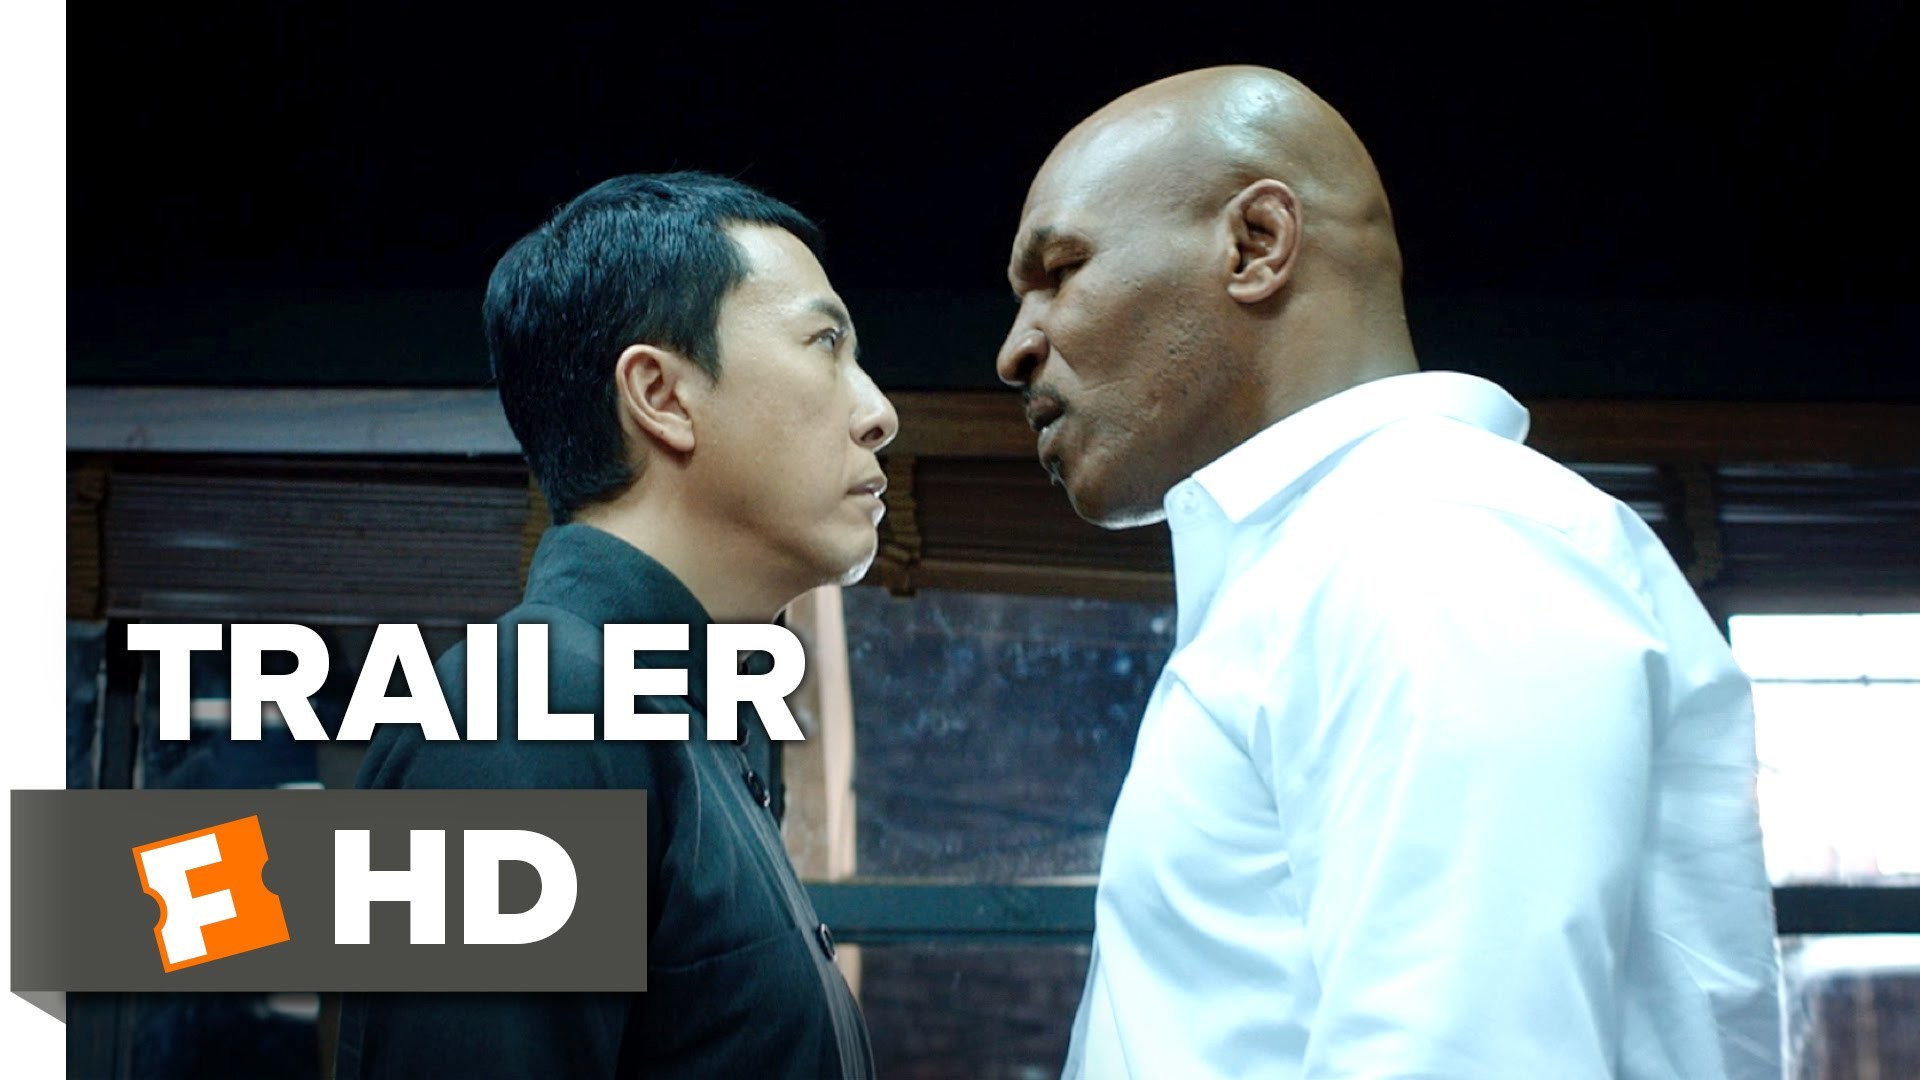 1920x1080 Ip Man 3 Official Teaser Trailer #1 (2015) - Donnie Yen, Mike Tyson Action  Movie HD - YouTube